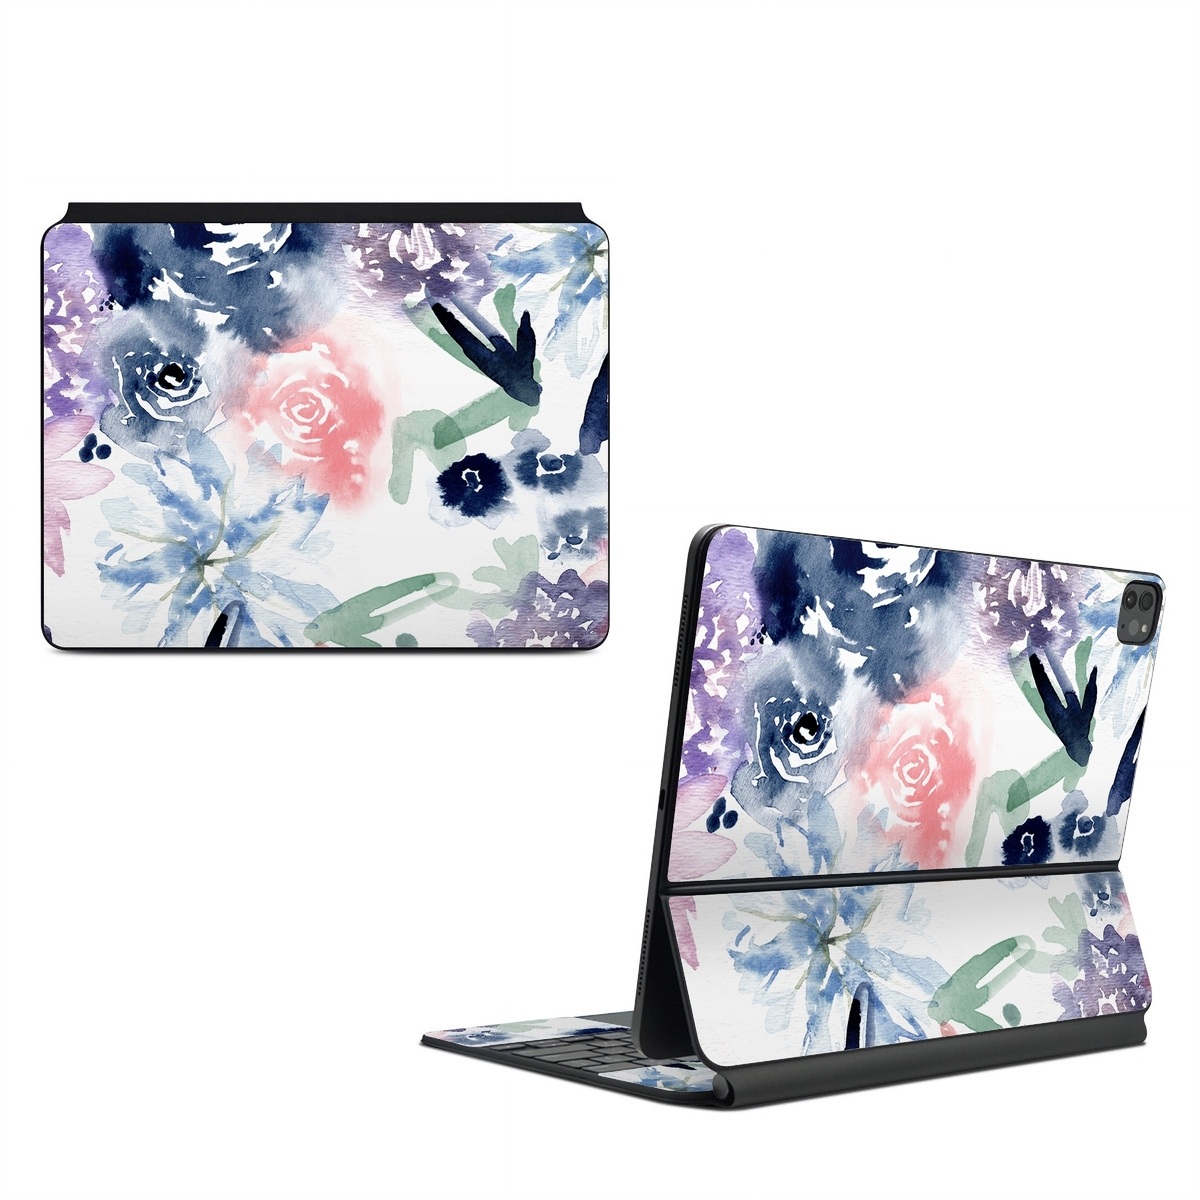 Magic Keyboard for iPad Series Skin design of Pattern, Graphic design, Design, Floral design, Plant, Flower, Illustration, with white, blue, purple, green, pink colors